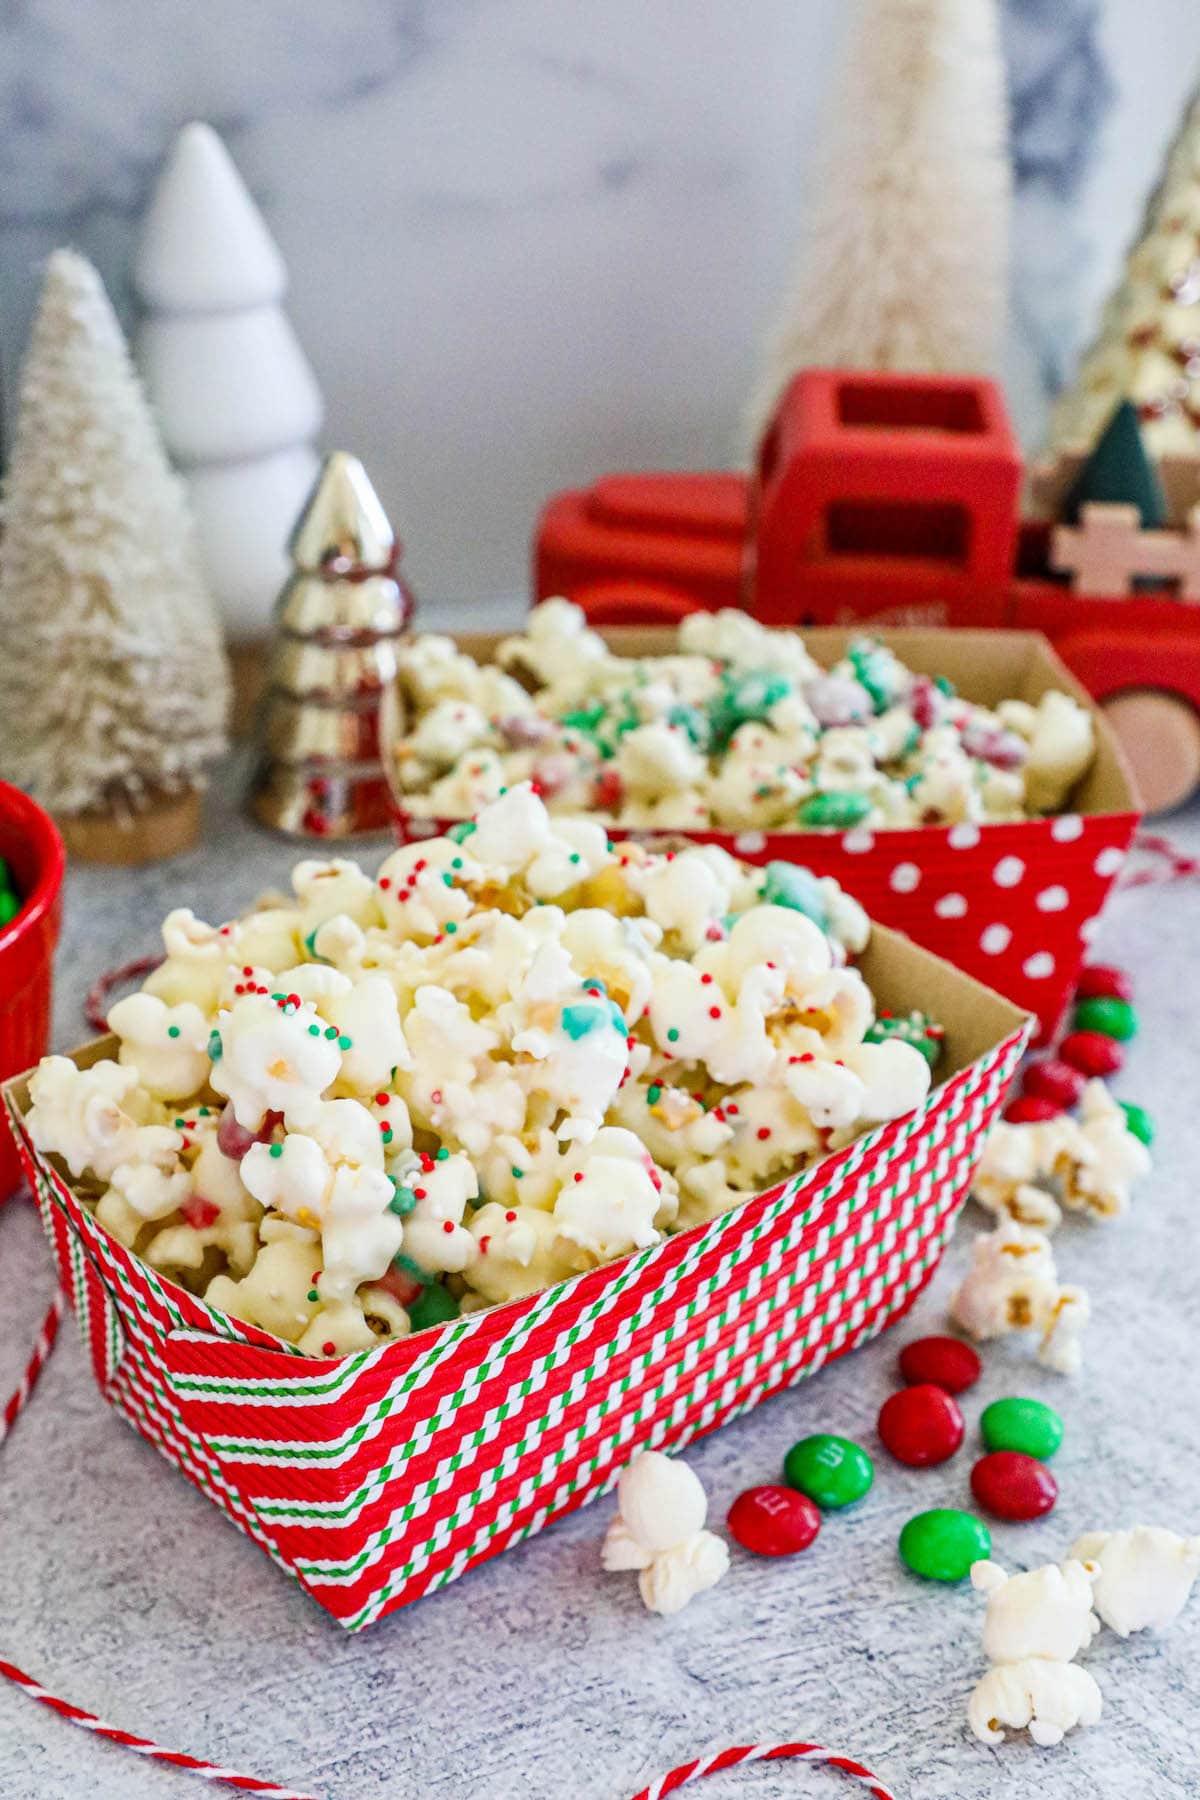 popcorn with candies in it in a striped box with Christmas trees in the background. 